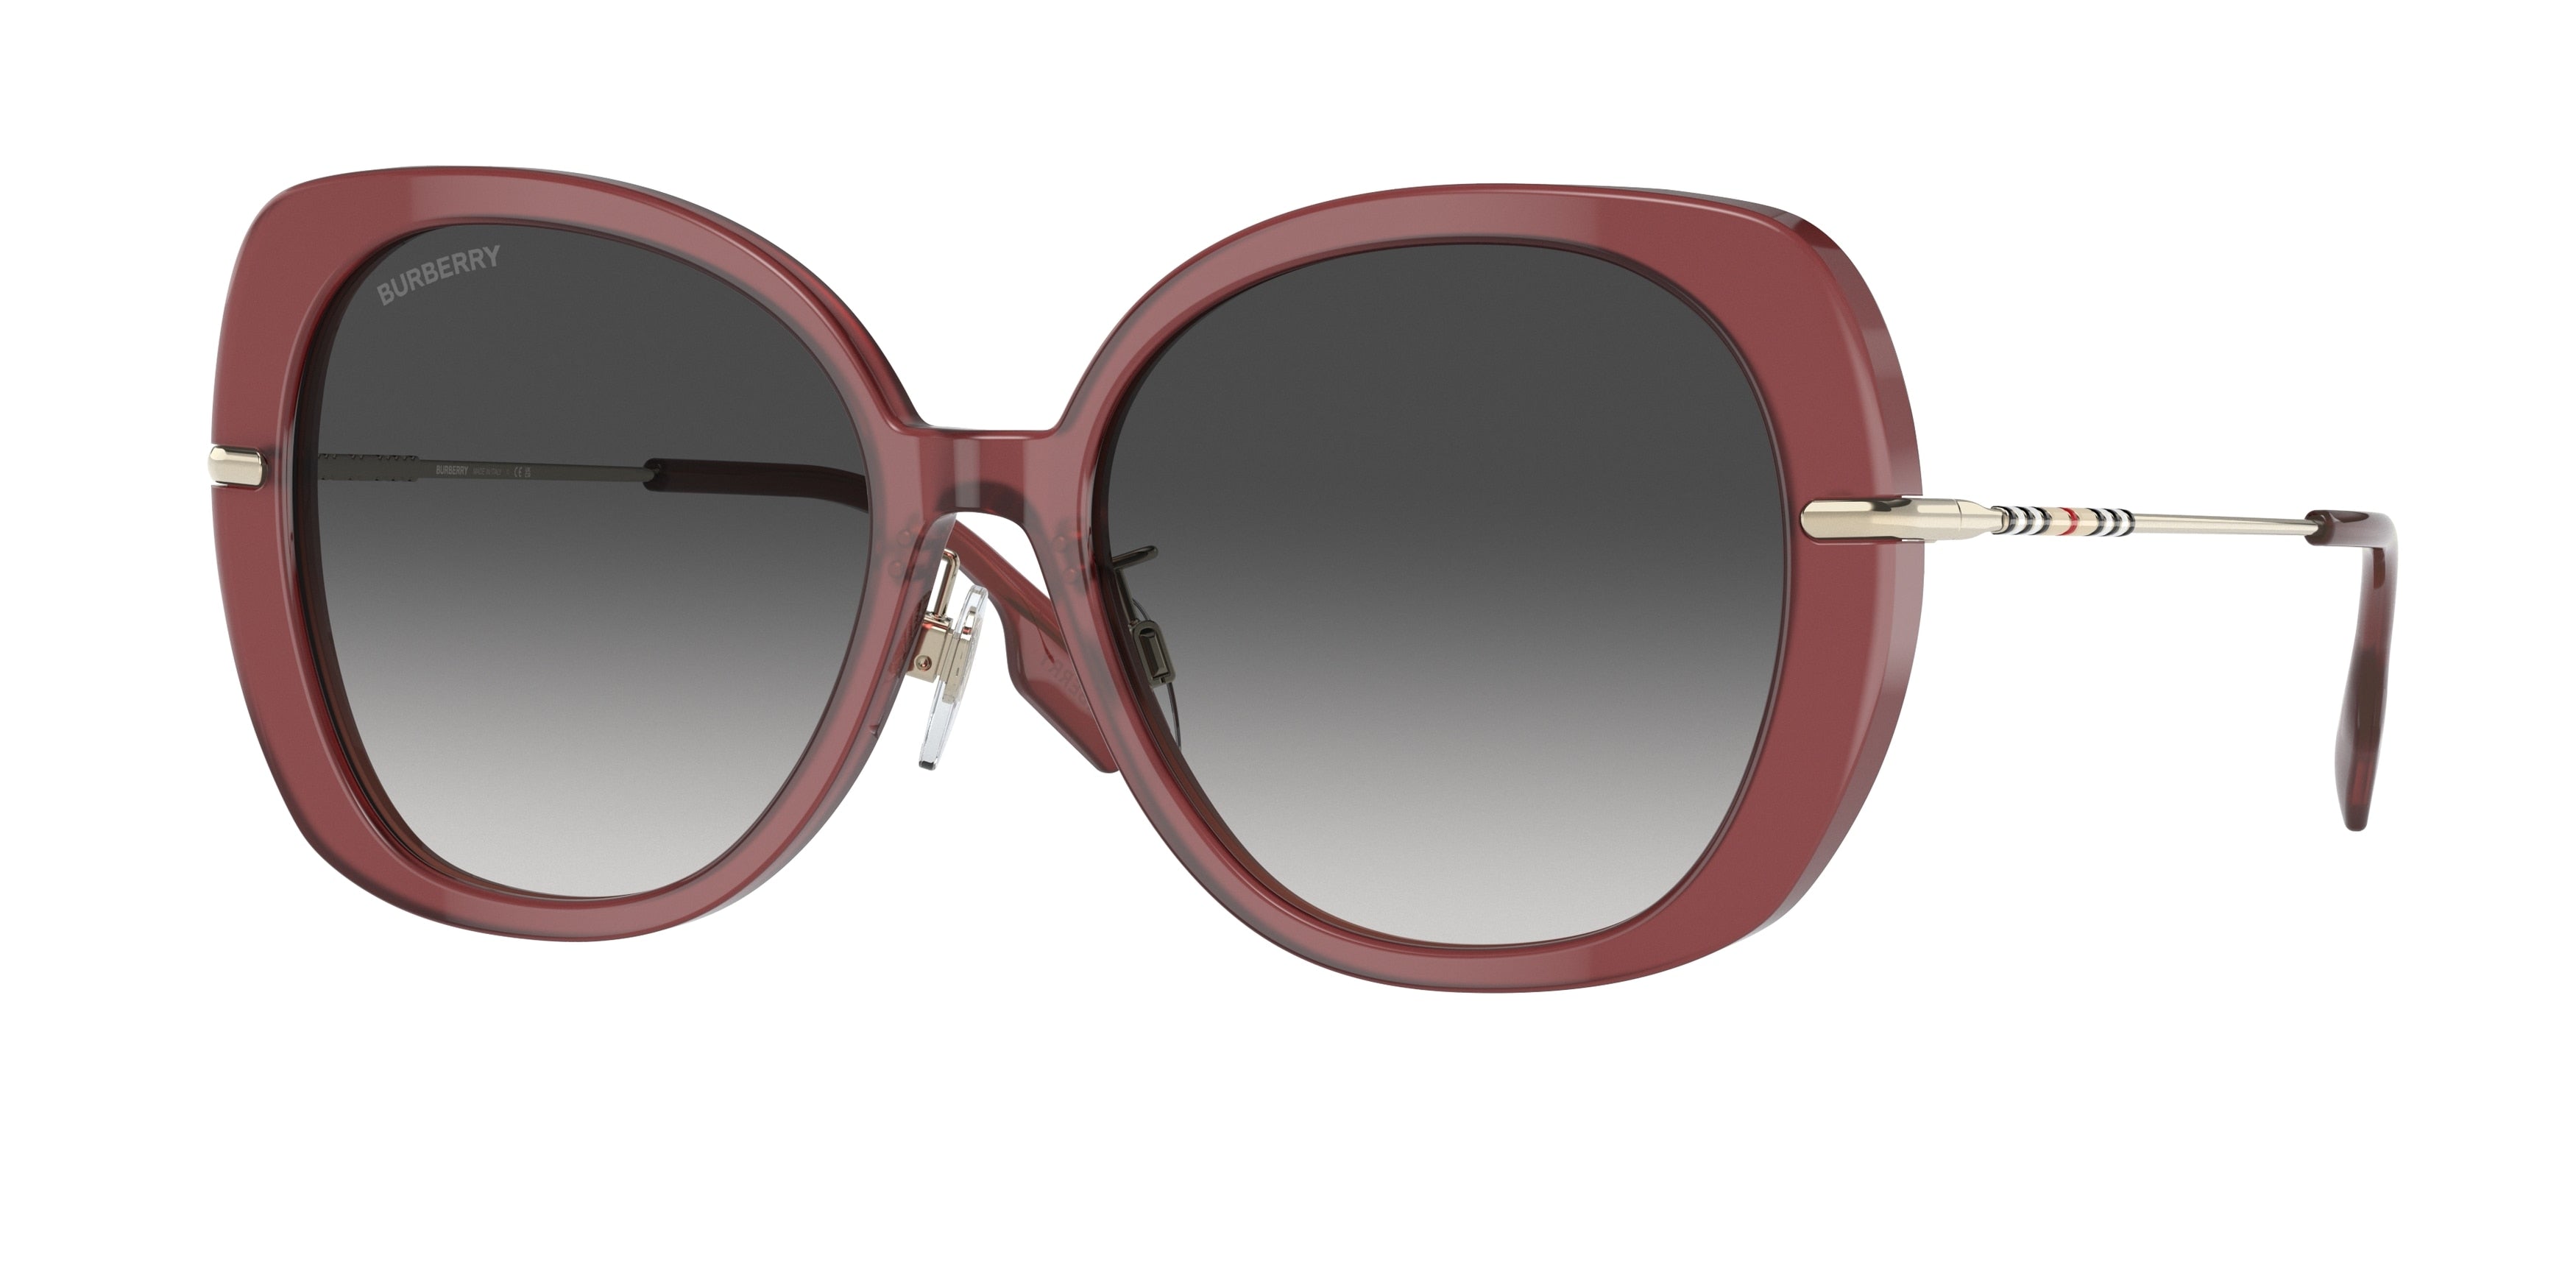 Burberry EUGENIE BE4374F Square Sunglasses  40228G-Bordeaux 55-140-17 - Color Map Red